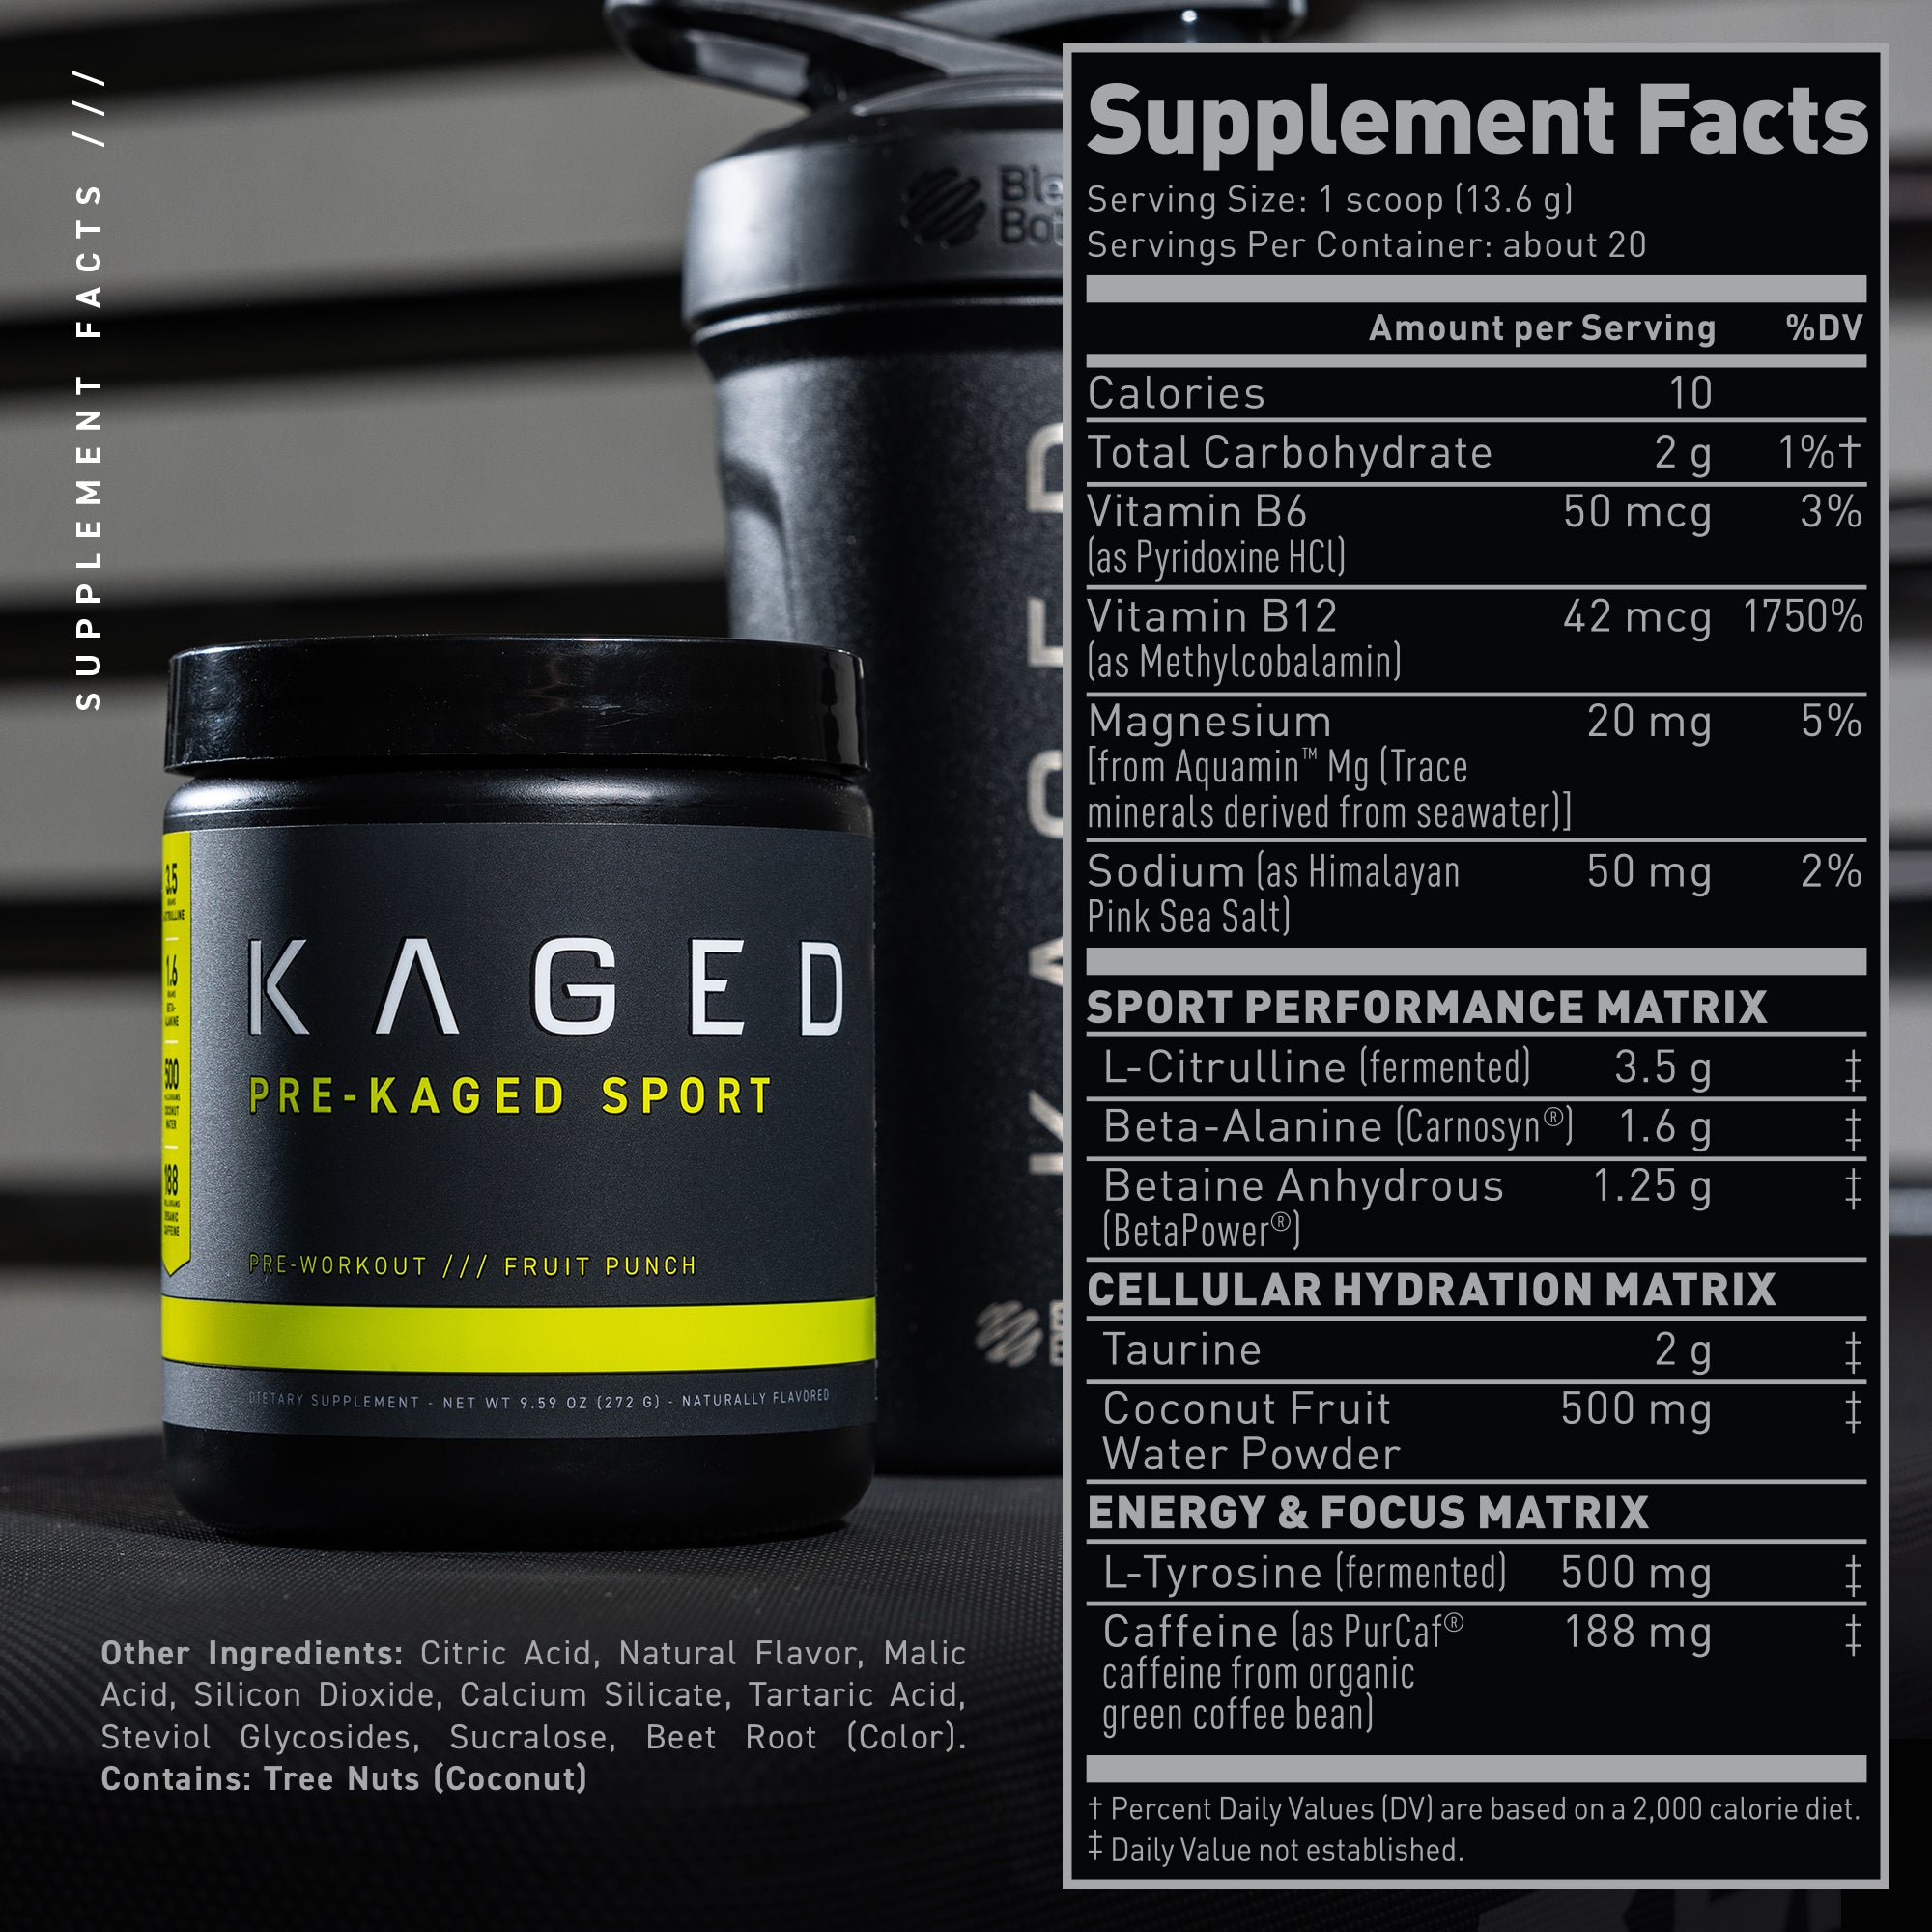 Kaged | Pre-Kaged Sport - Athletic Performance Pre-Workout